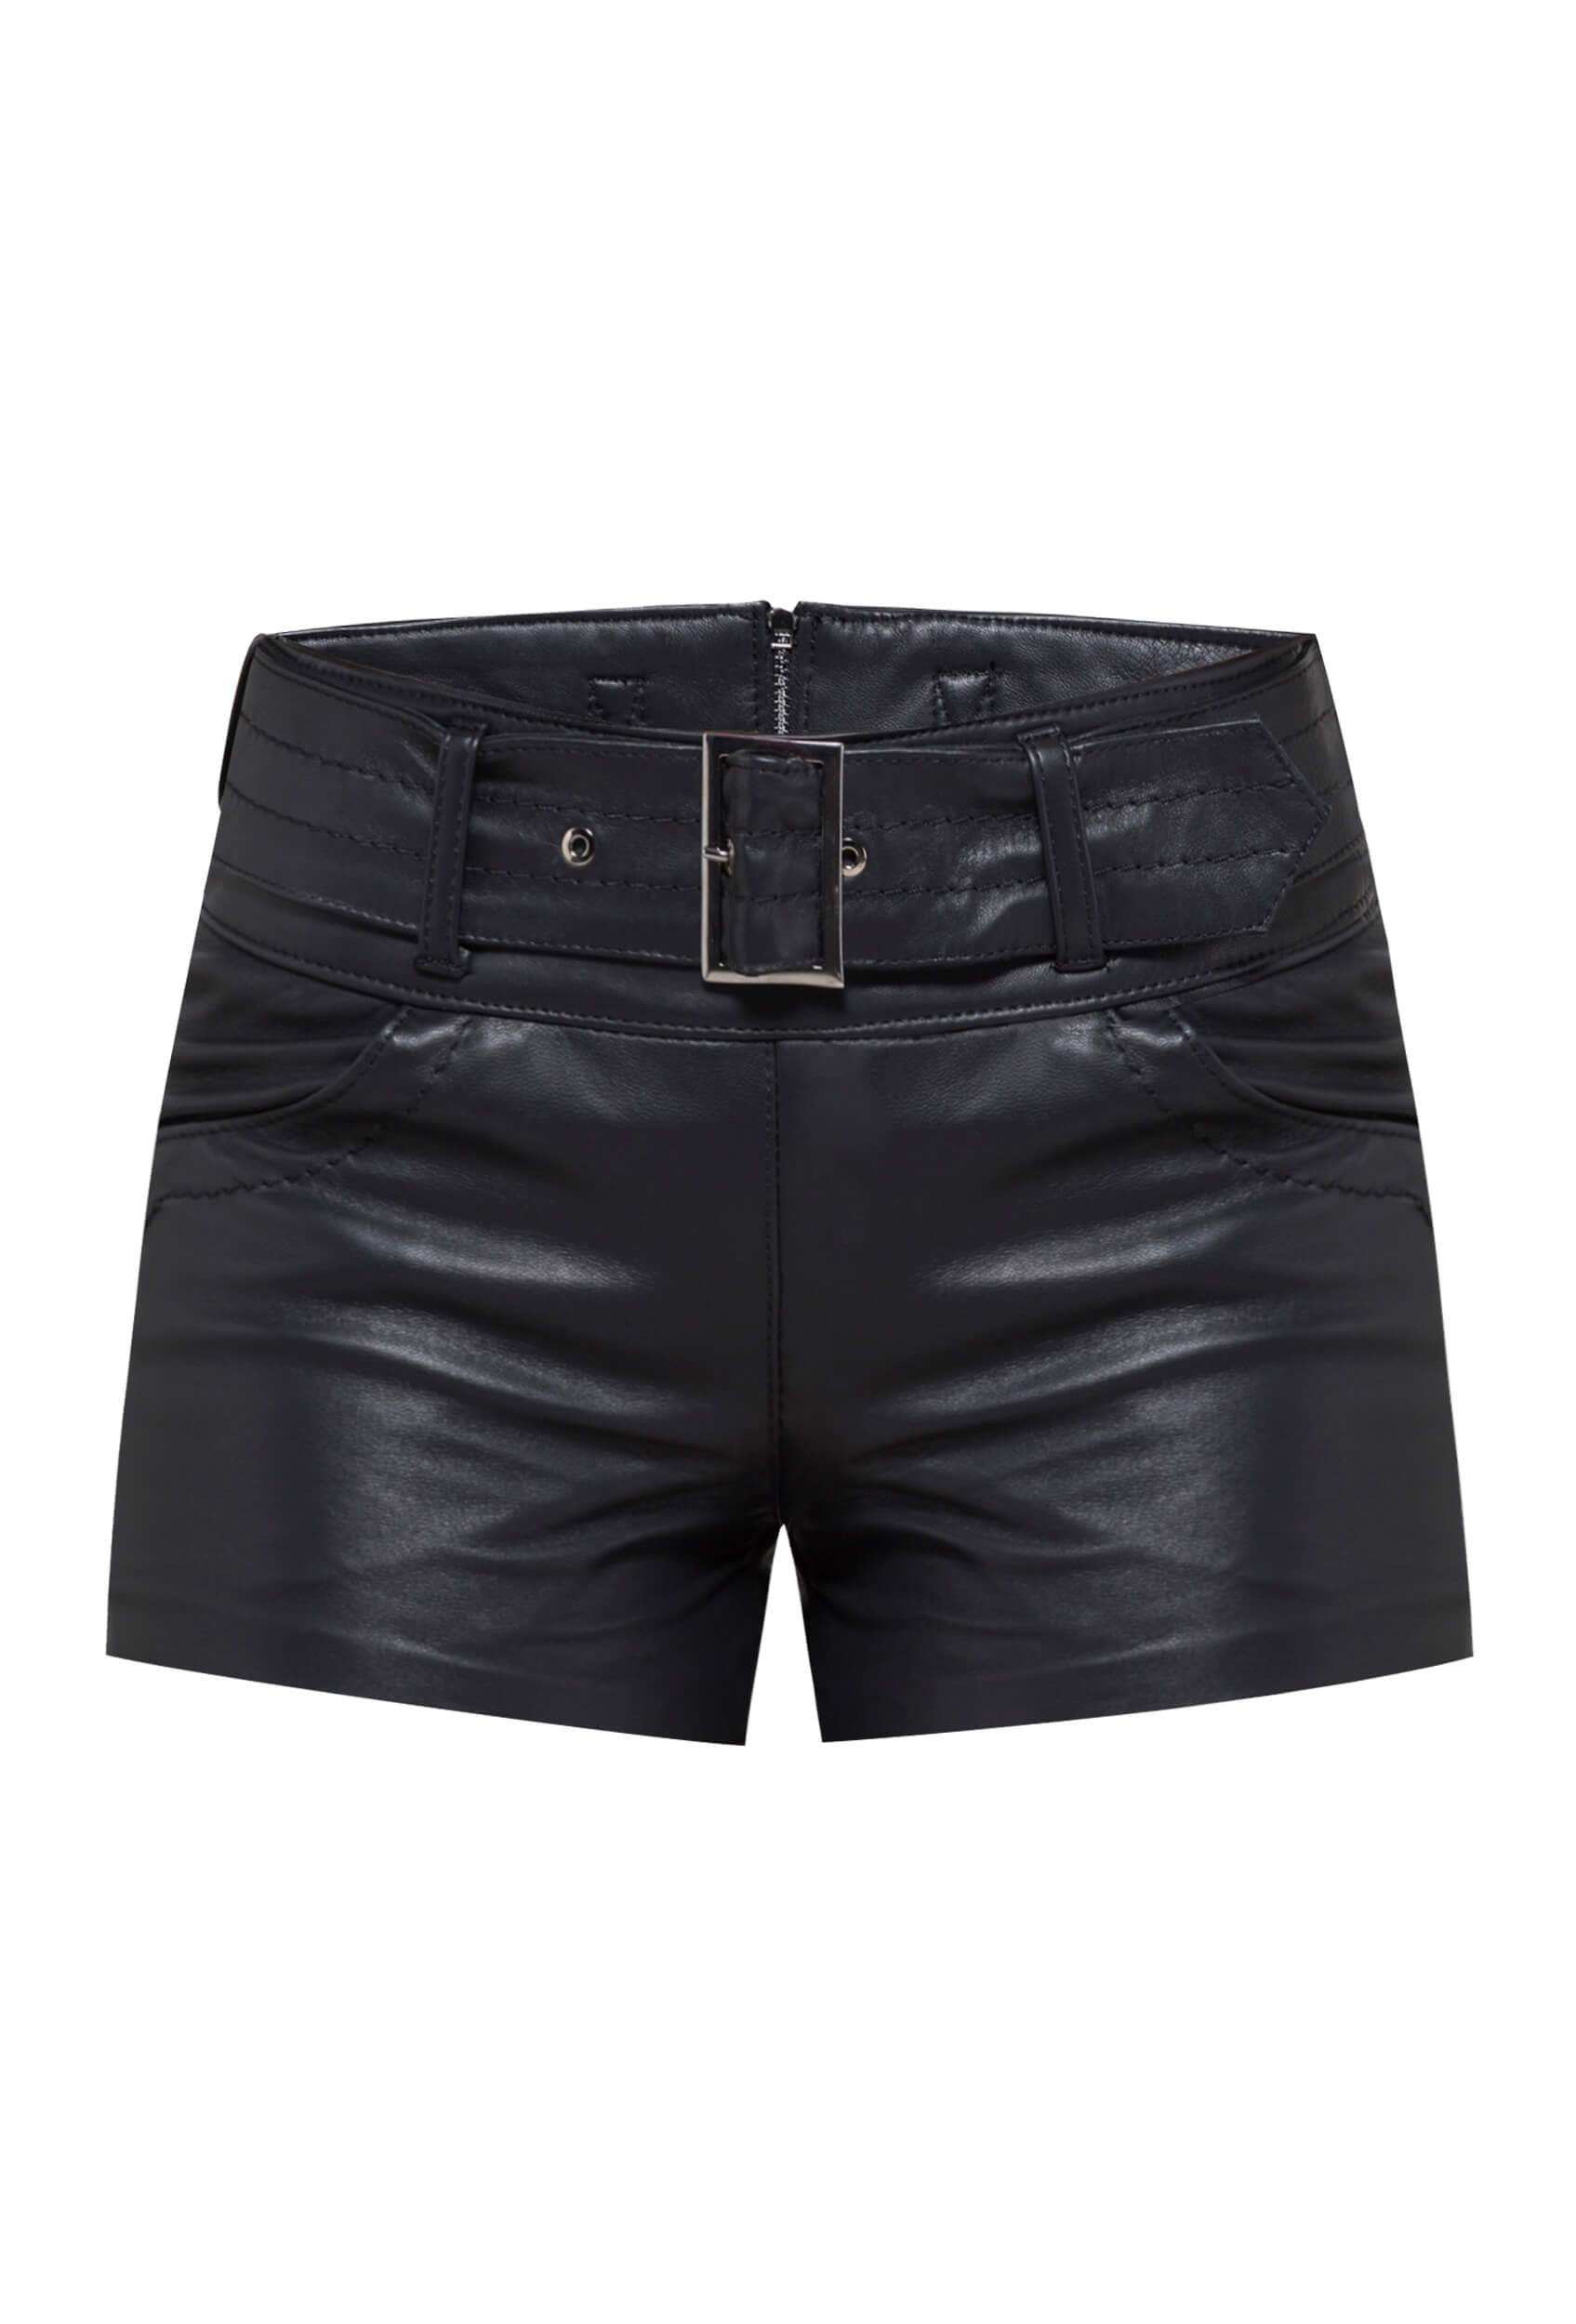 women's leather shorts, black leather shorts, black natural leather shorts, premium Italian leather shorts, must have shorts for shapely legs, Italian leather shorts, slim fit leather shorts, Polish designer women's shorts